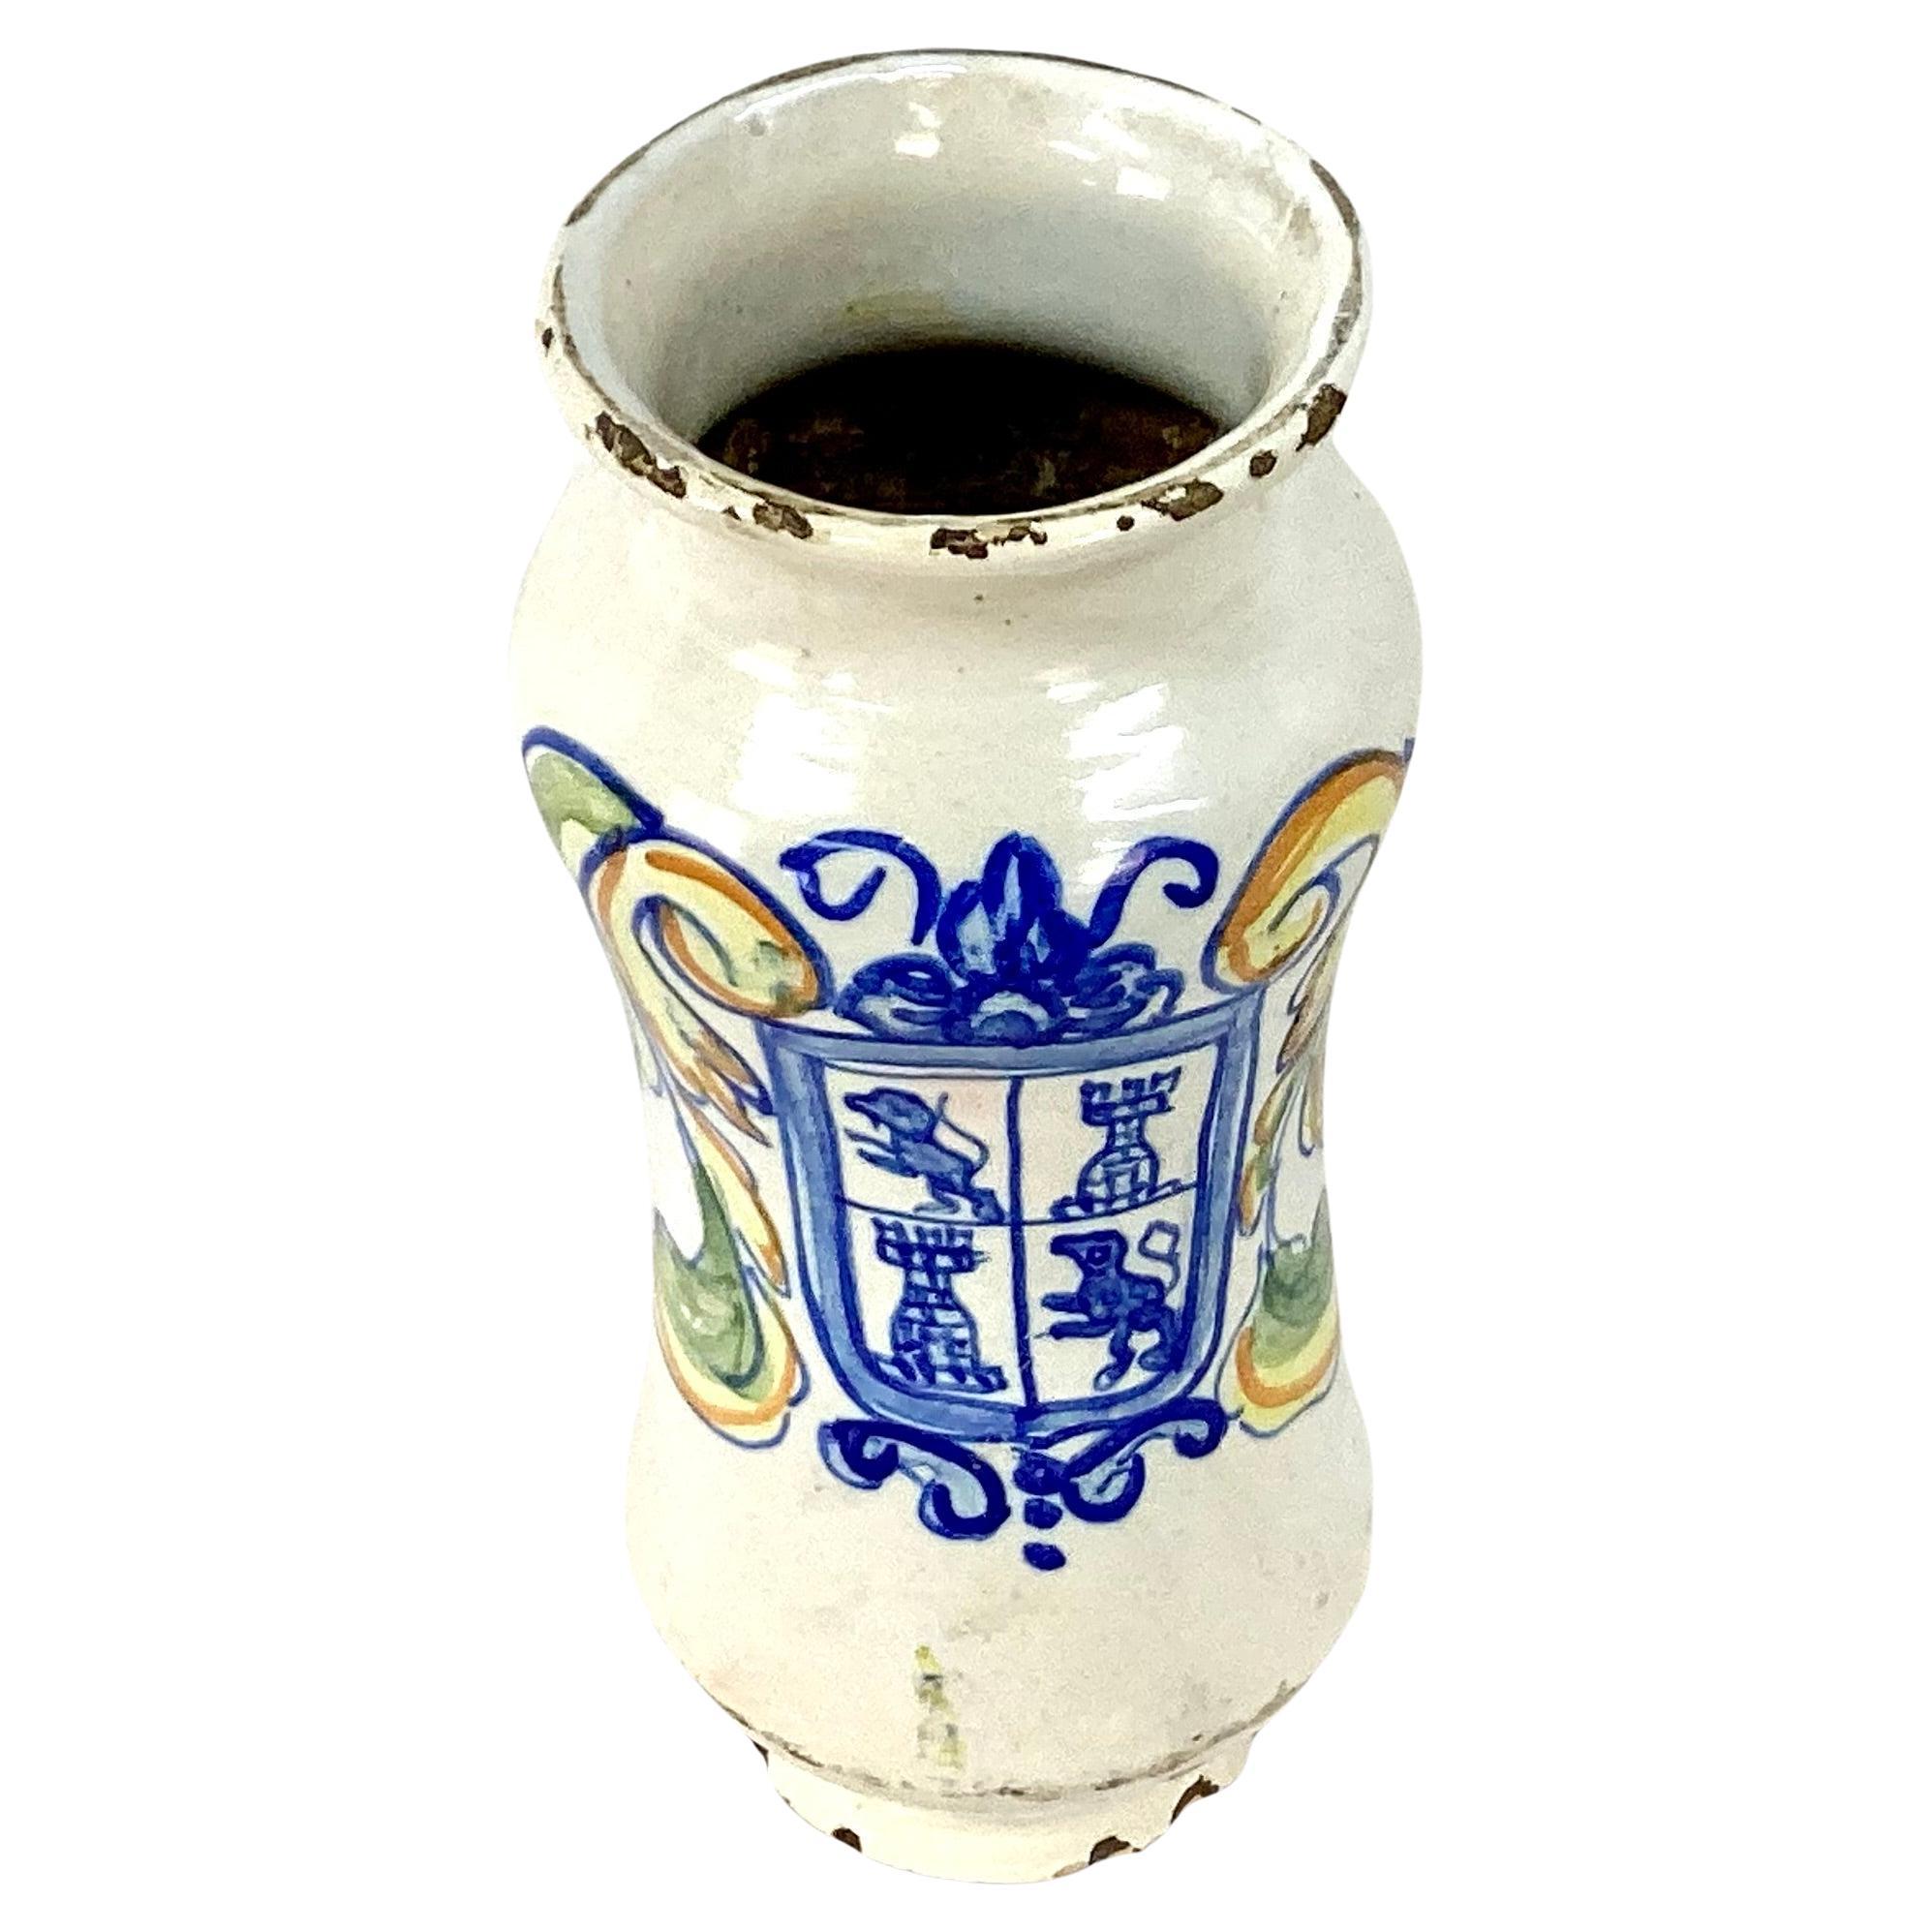 Tall antique 18th century Italian ceramic apothecary jar. Colors of blue, yellow and green on off white background.